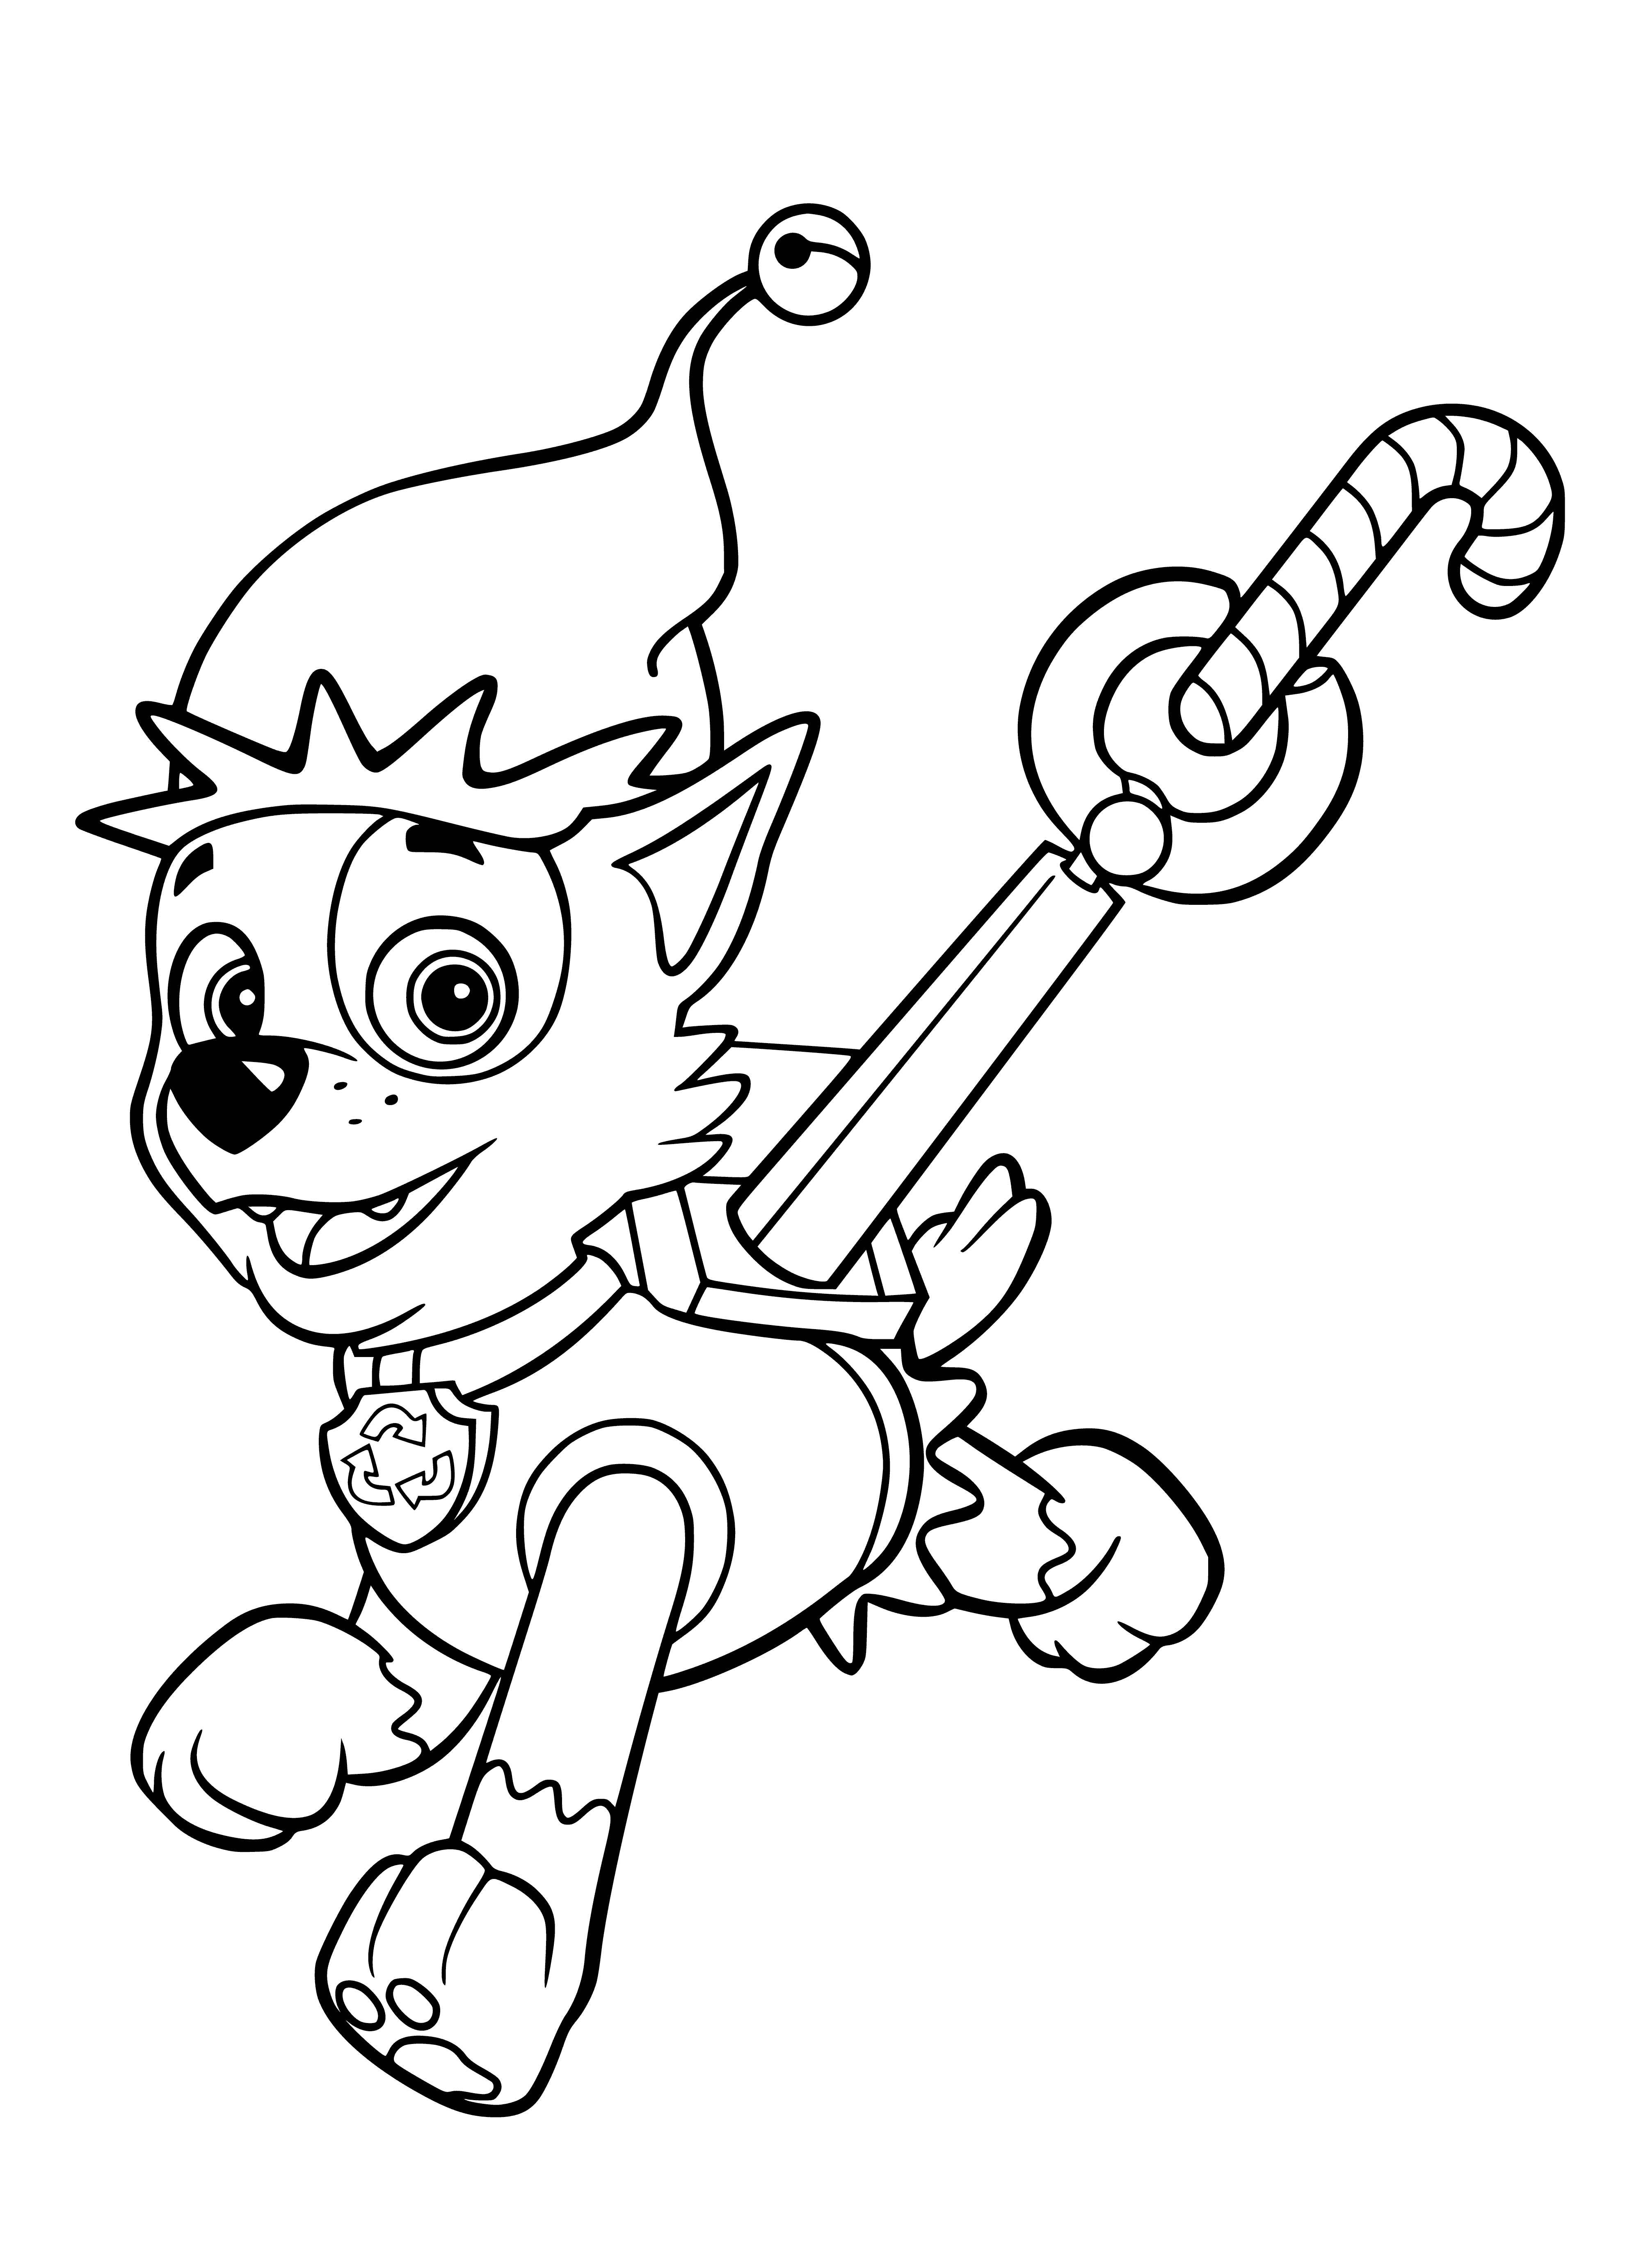 coloring page: Brown and white dog stands on gray/white rock wearing green/brown backpack and red scarf.